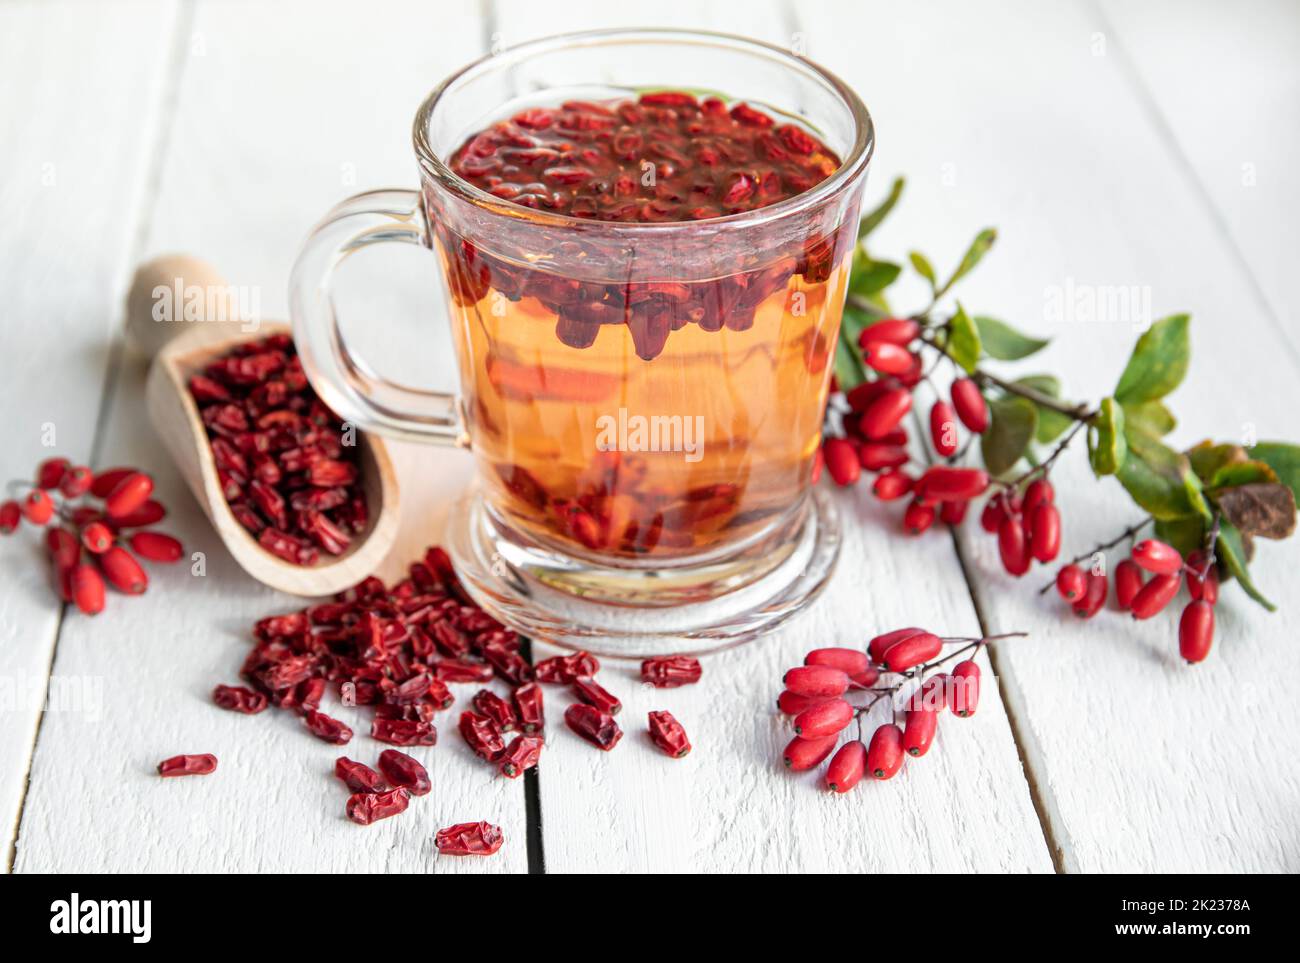 Berberis vulgaris also known as common barberry, European barberry or barberry tea drink in class mug in home kitchen. Dried and fresh berries. Stock Photo